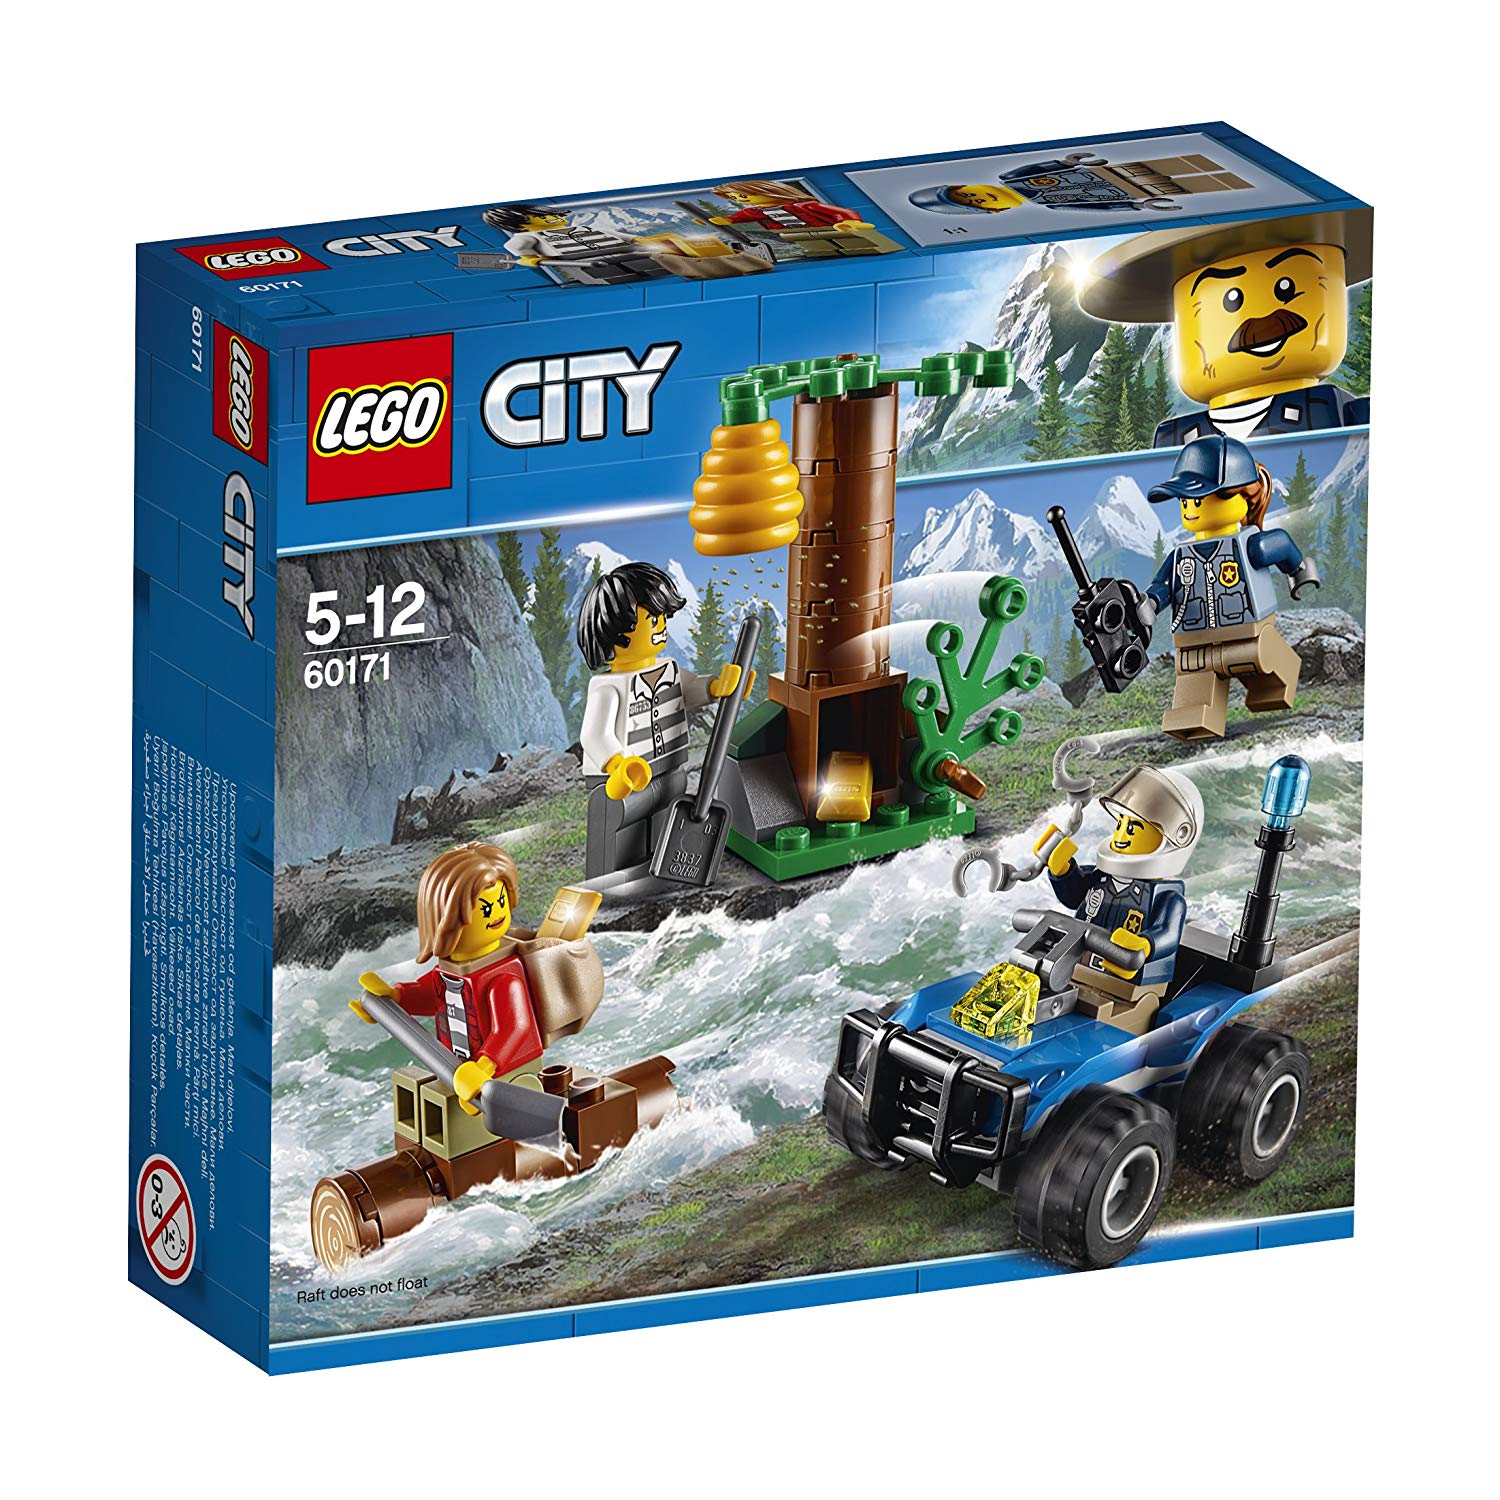 LEGO City Police Tracking through the mountains and Construction Toy